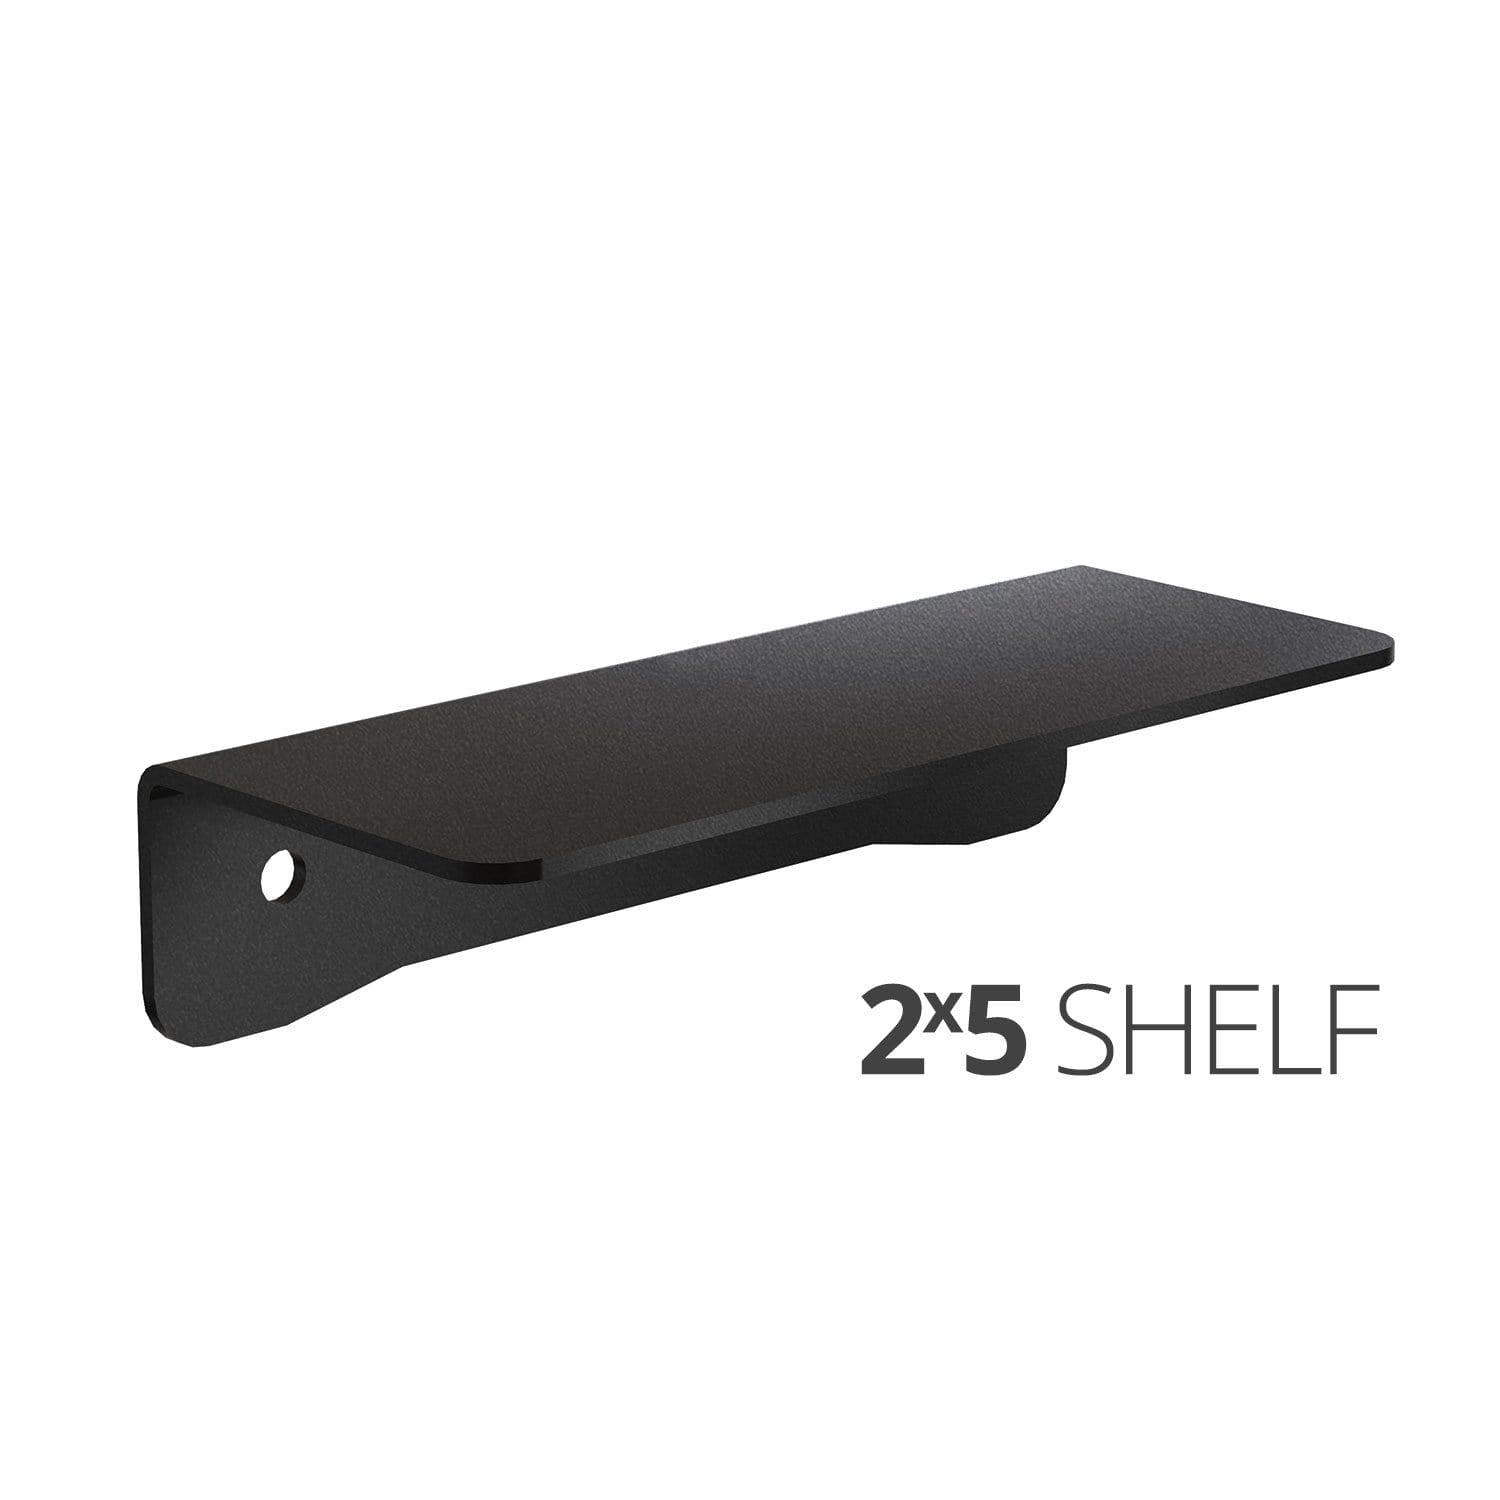 Small wall mounted shelves for home, office and garage - 2x5 angle